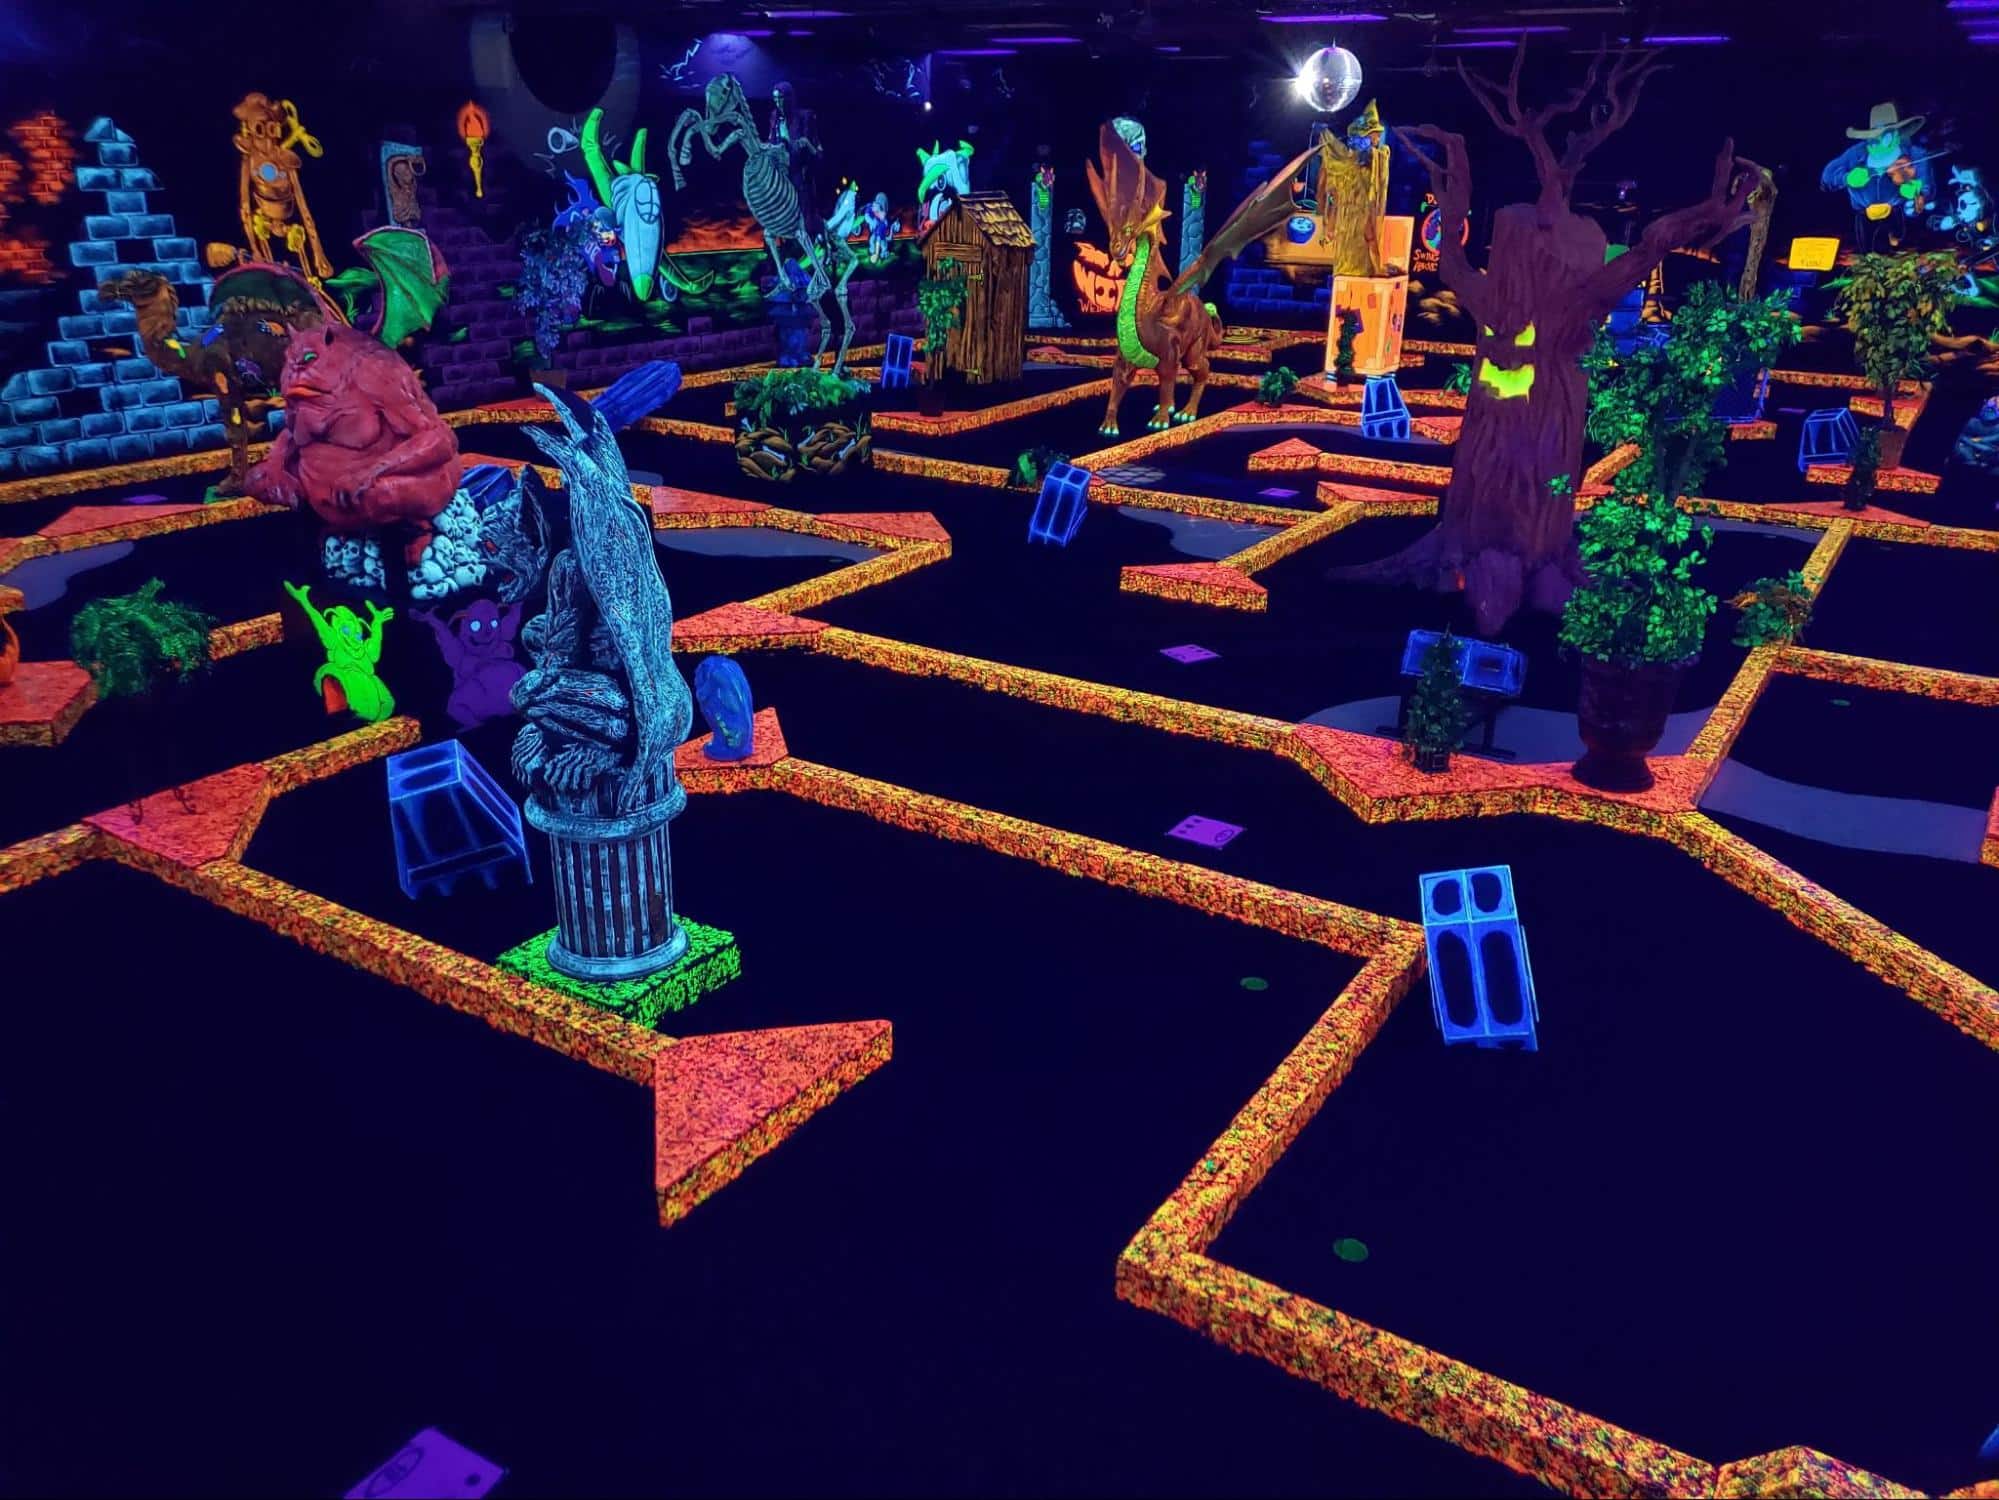 A glow-in-the-dark indoor mini golf course at Monster Mini Golf Gastonia.